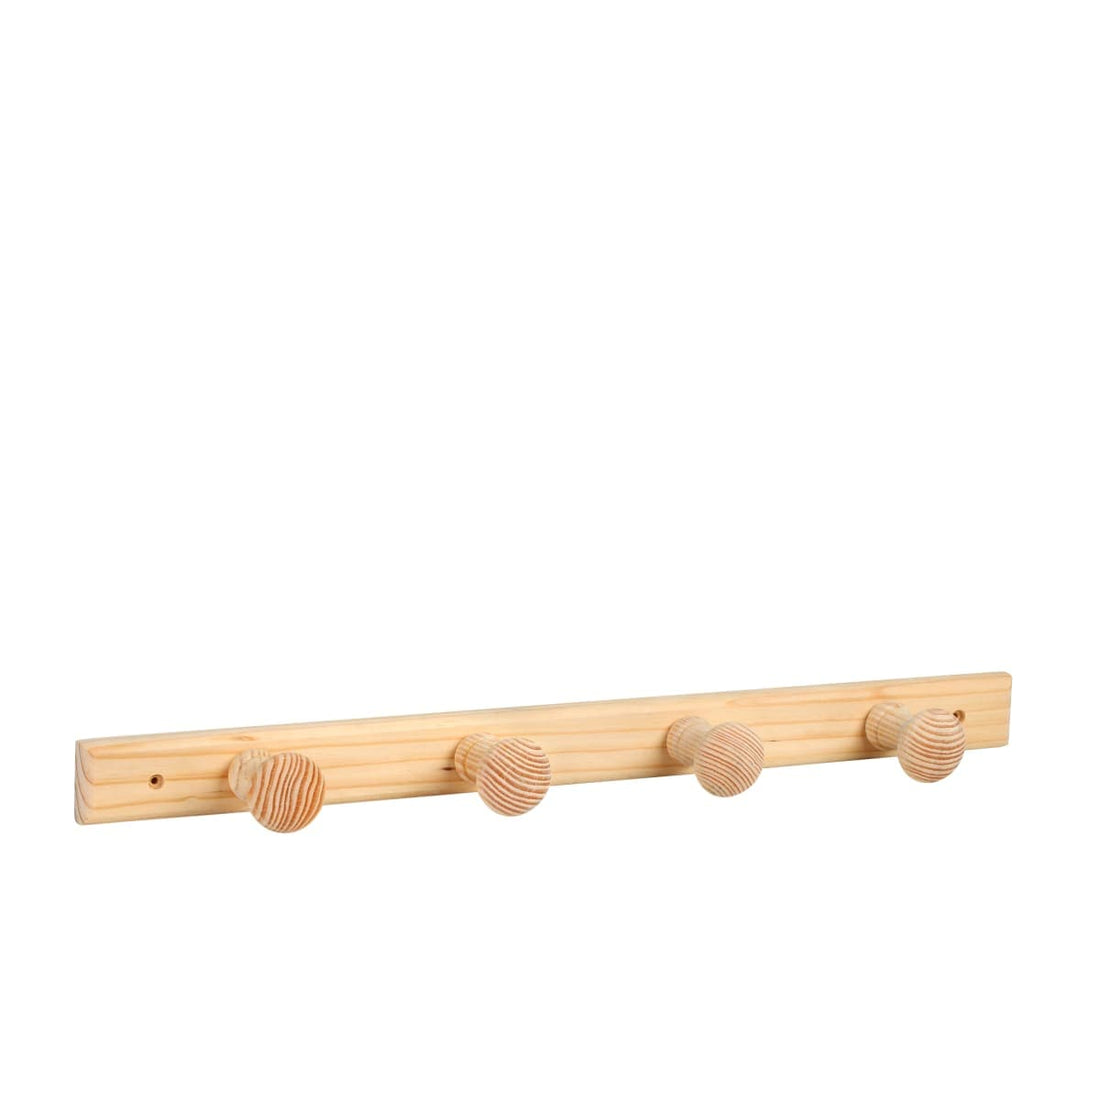 4-PLACE COAT RACK IN UNTREATED WOOD - best price from Maltashopper.com BR410331099